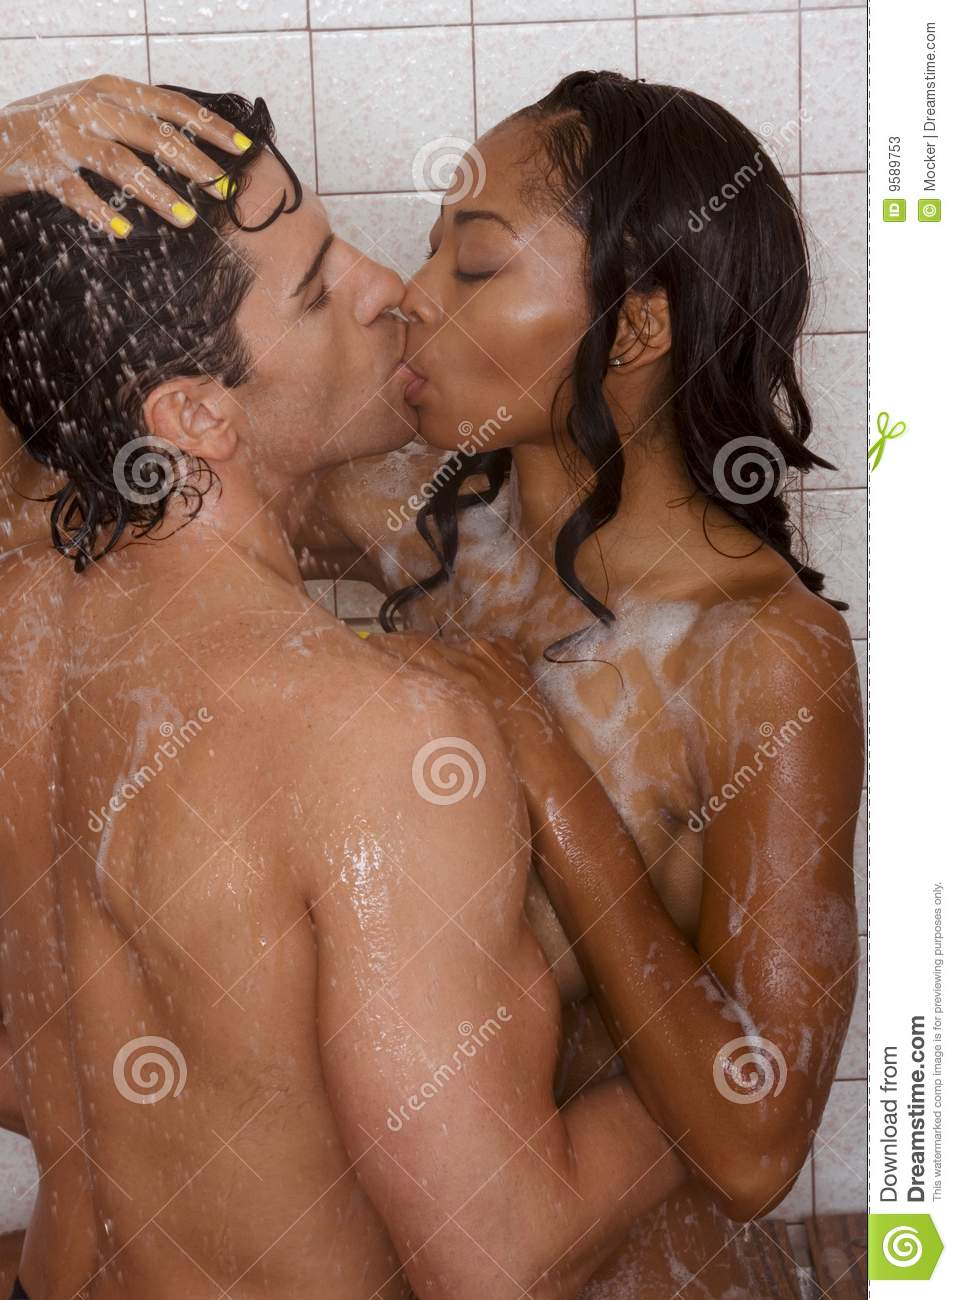 best of In together shower couples Nude